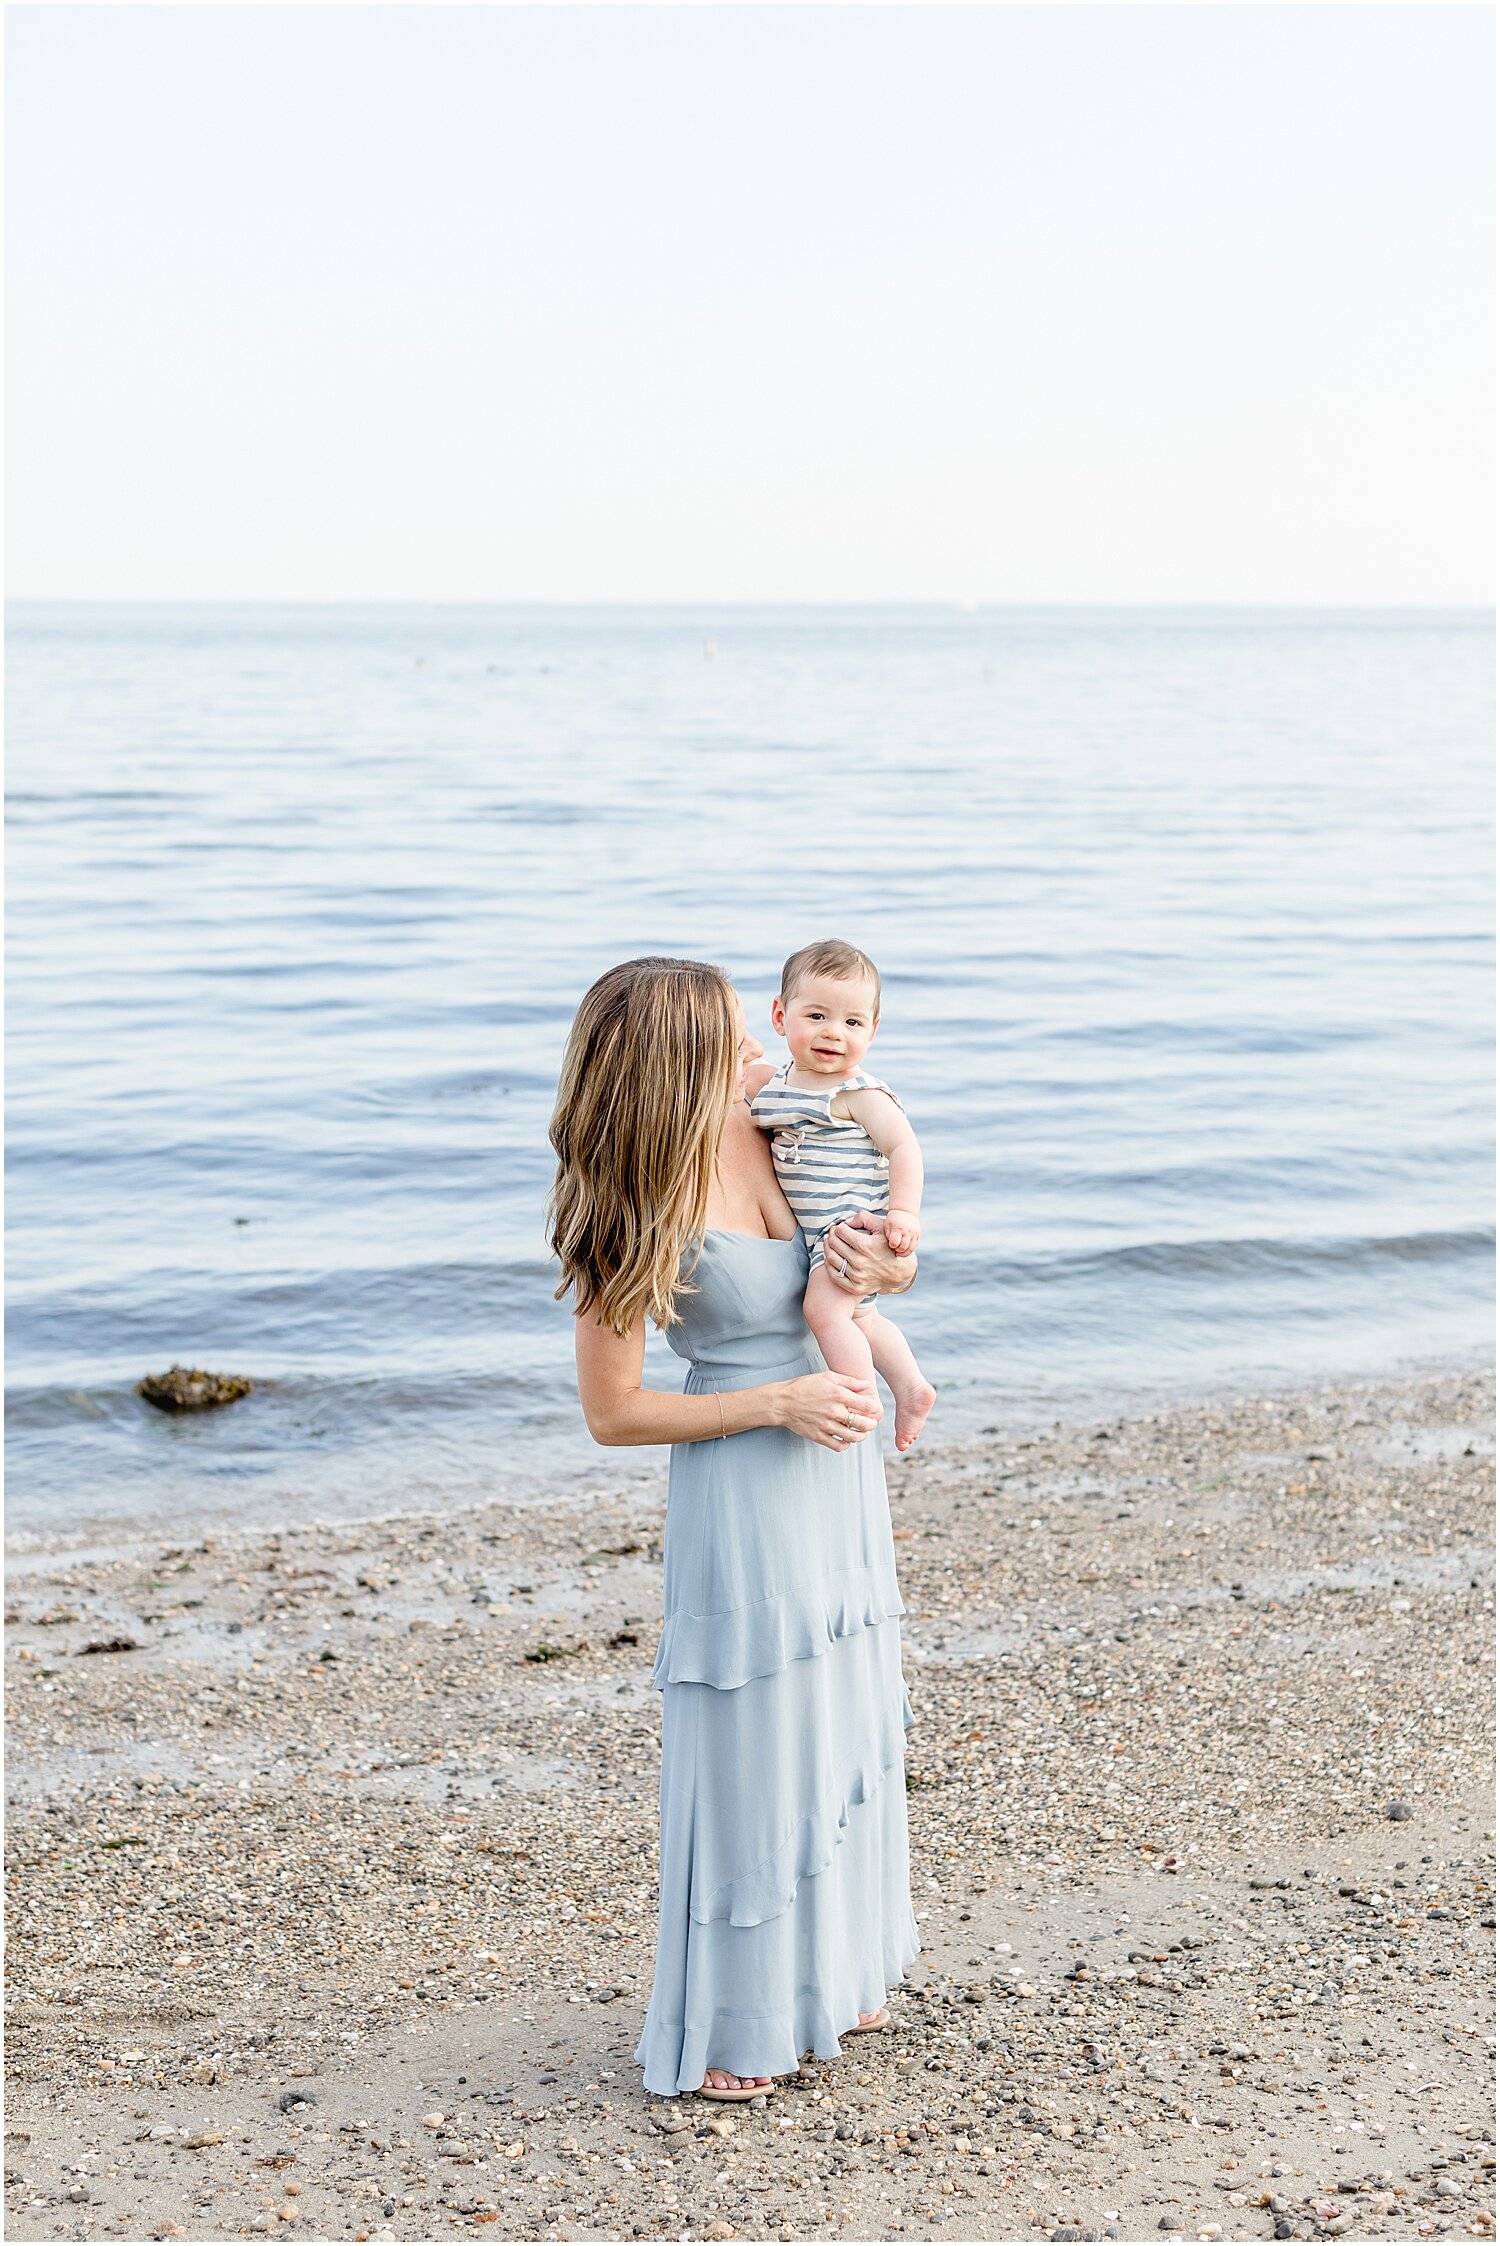 6 month milestone session at Sherwood Island in Westport, CT. Photos by Westport Family Photographer, Kristin Wood Photography.